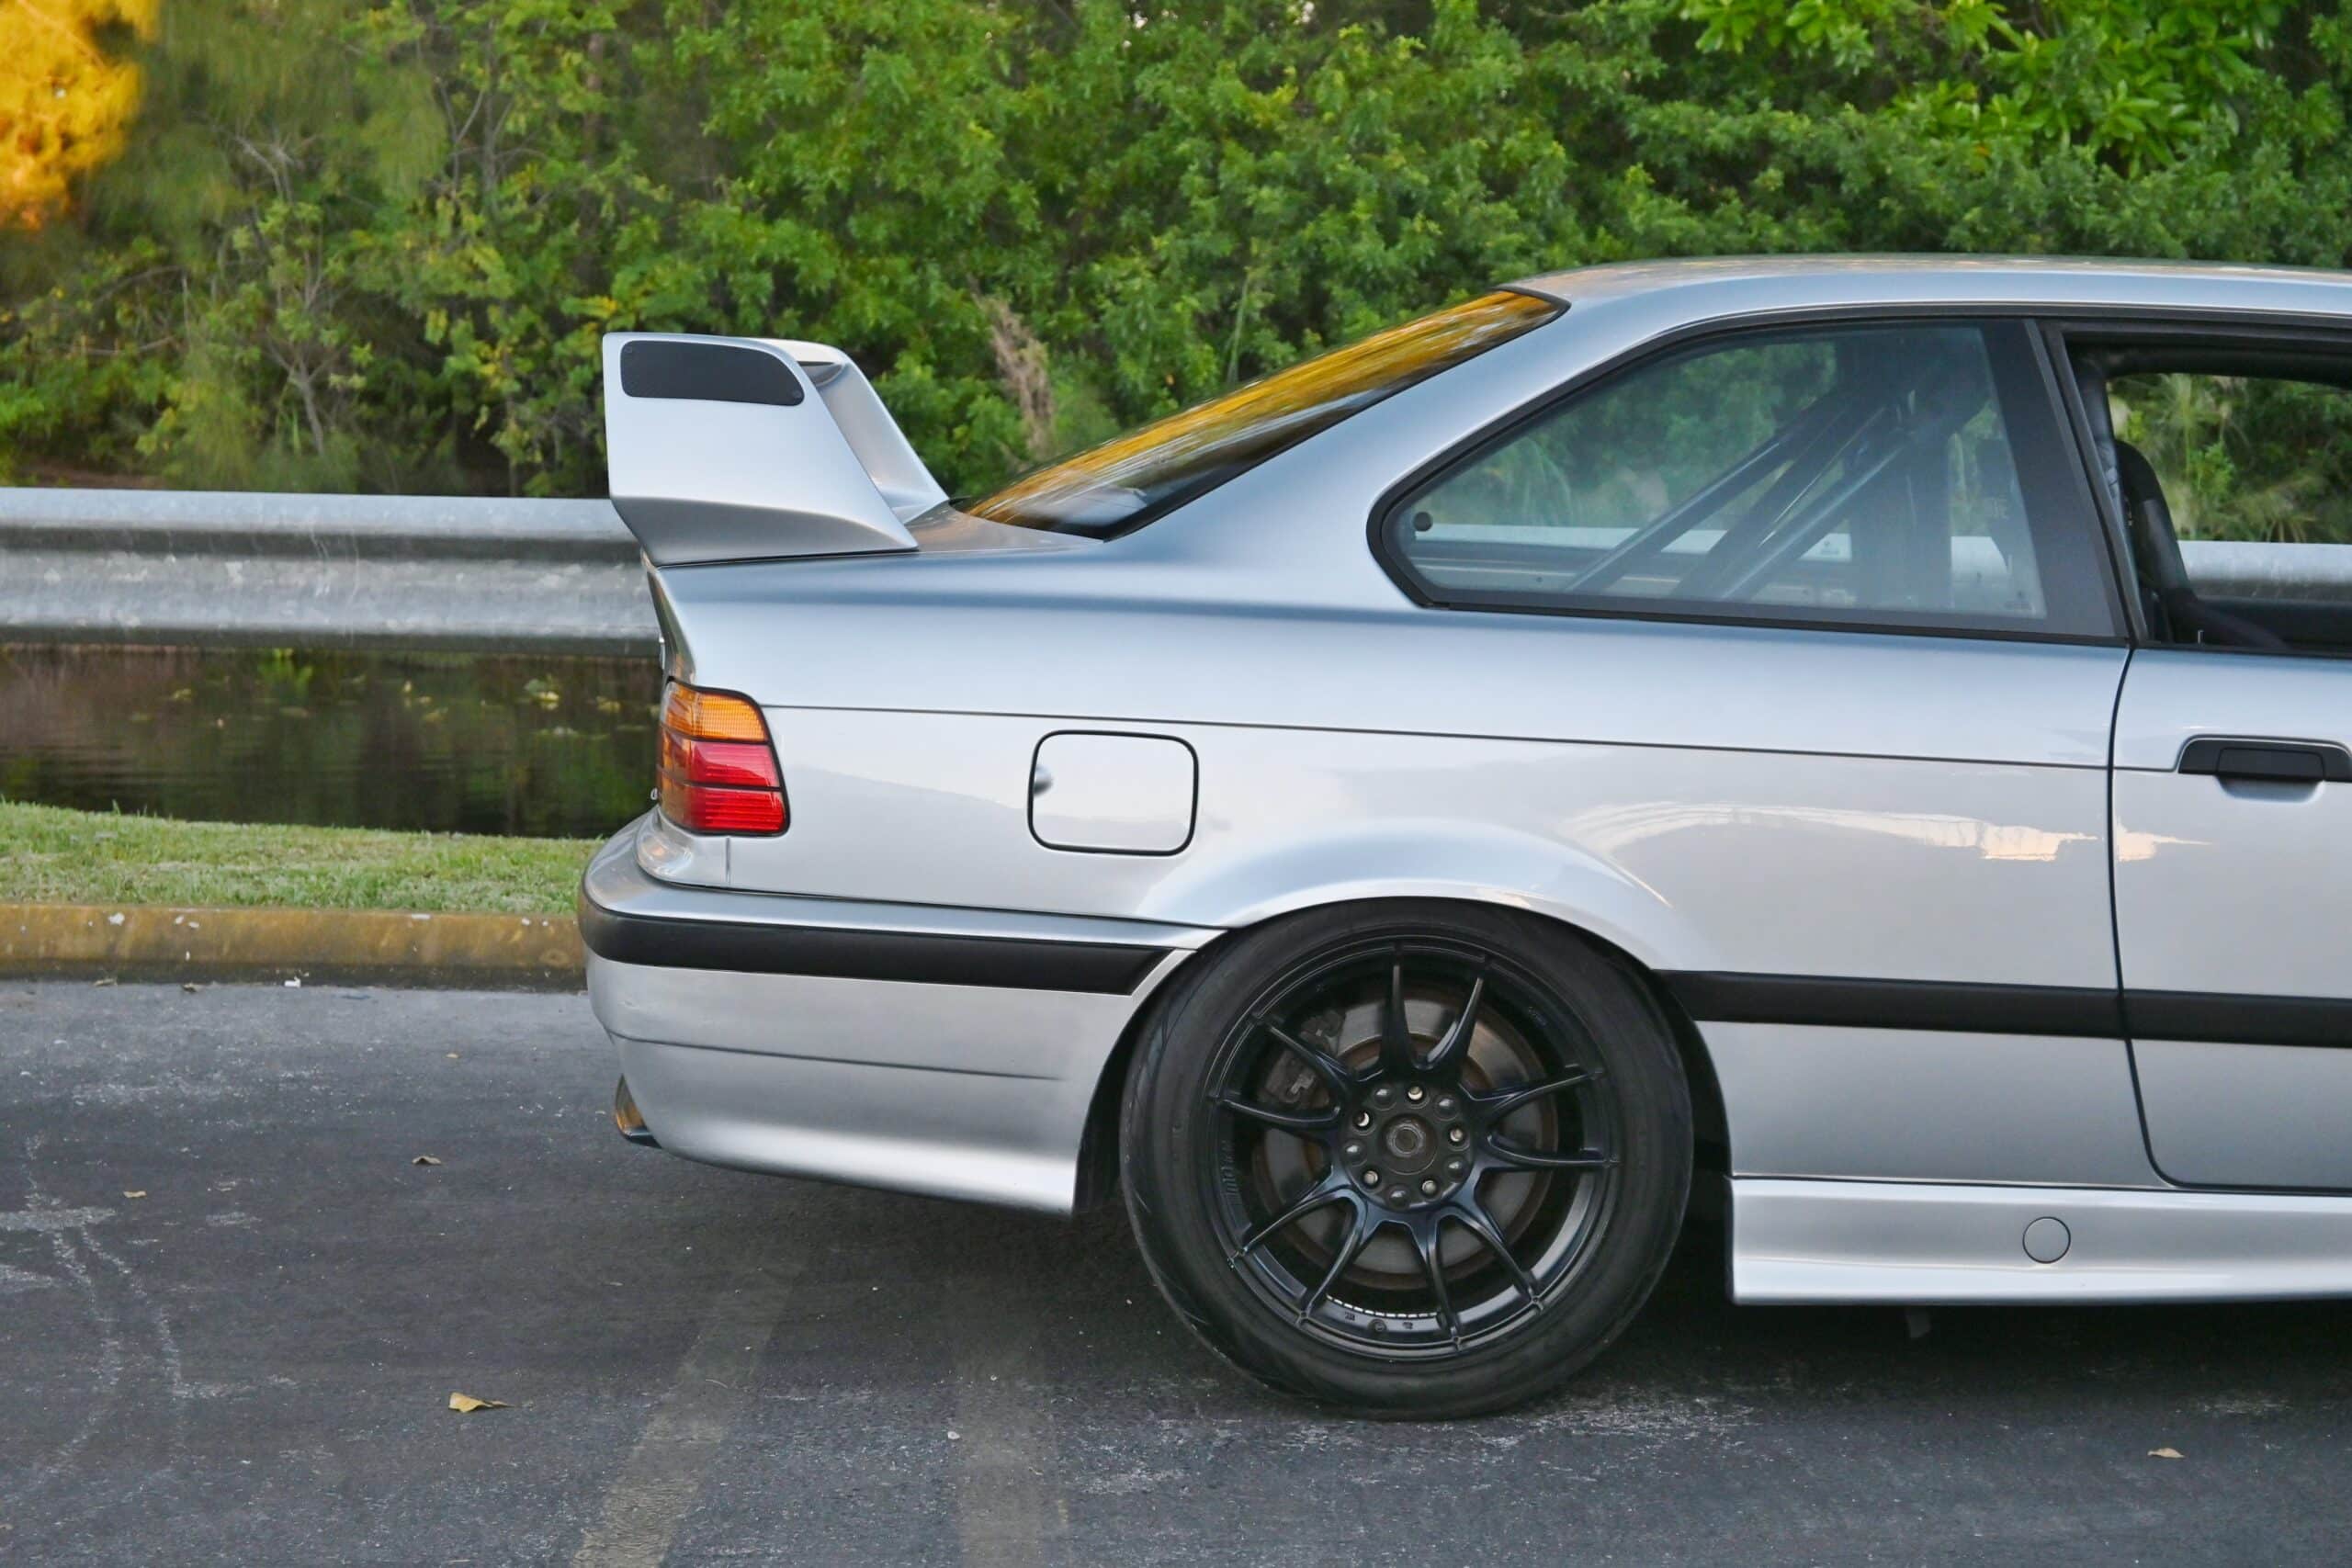 1996 BMW M3 Euro E36 S50B32 / 6 speed manual / Slicktop / Street & Track / ARC Coilovers / Cold AC